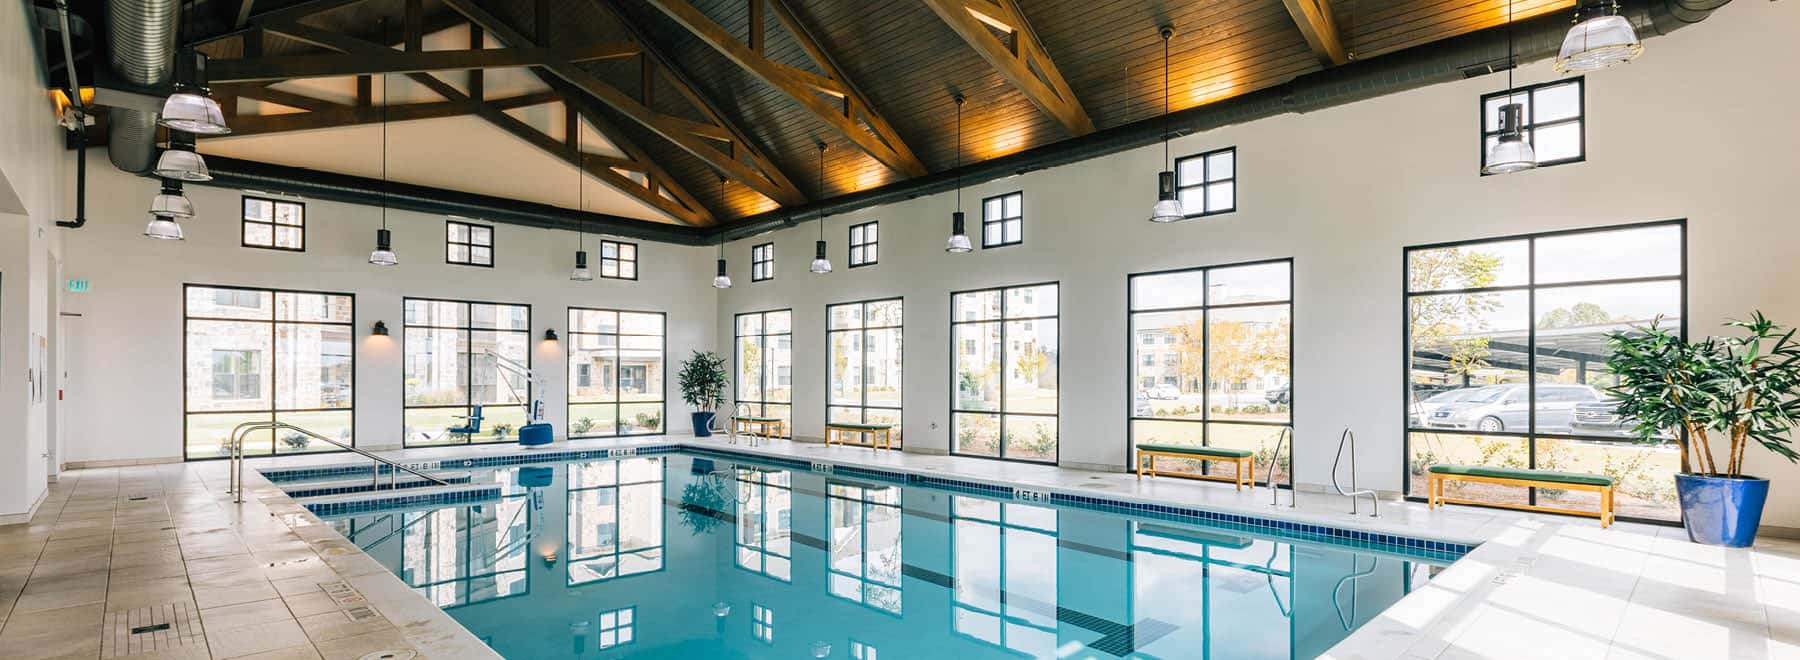 indoor swimming pool at The Spires